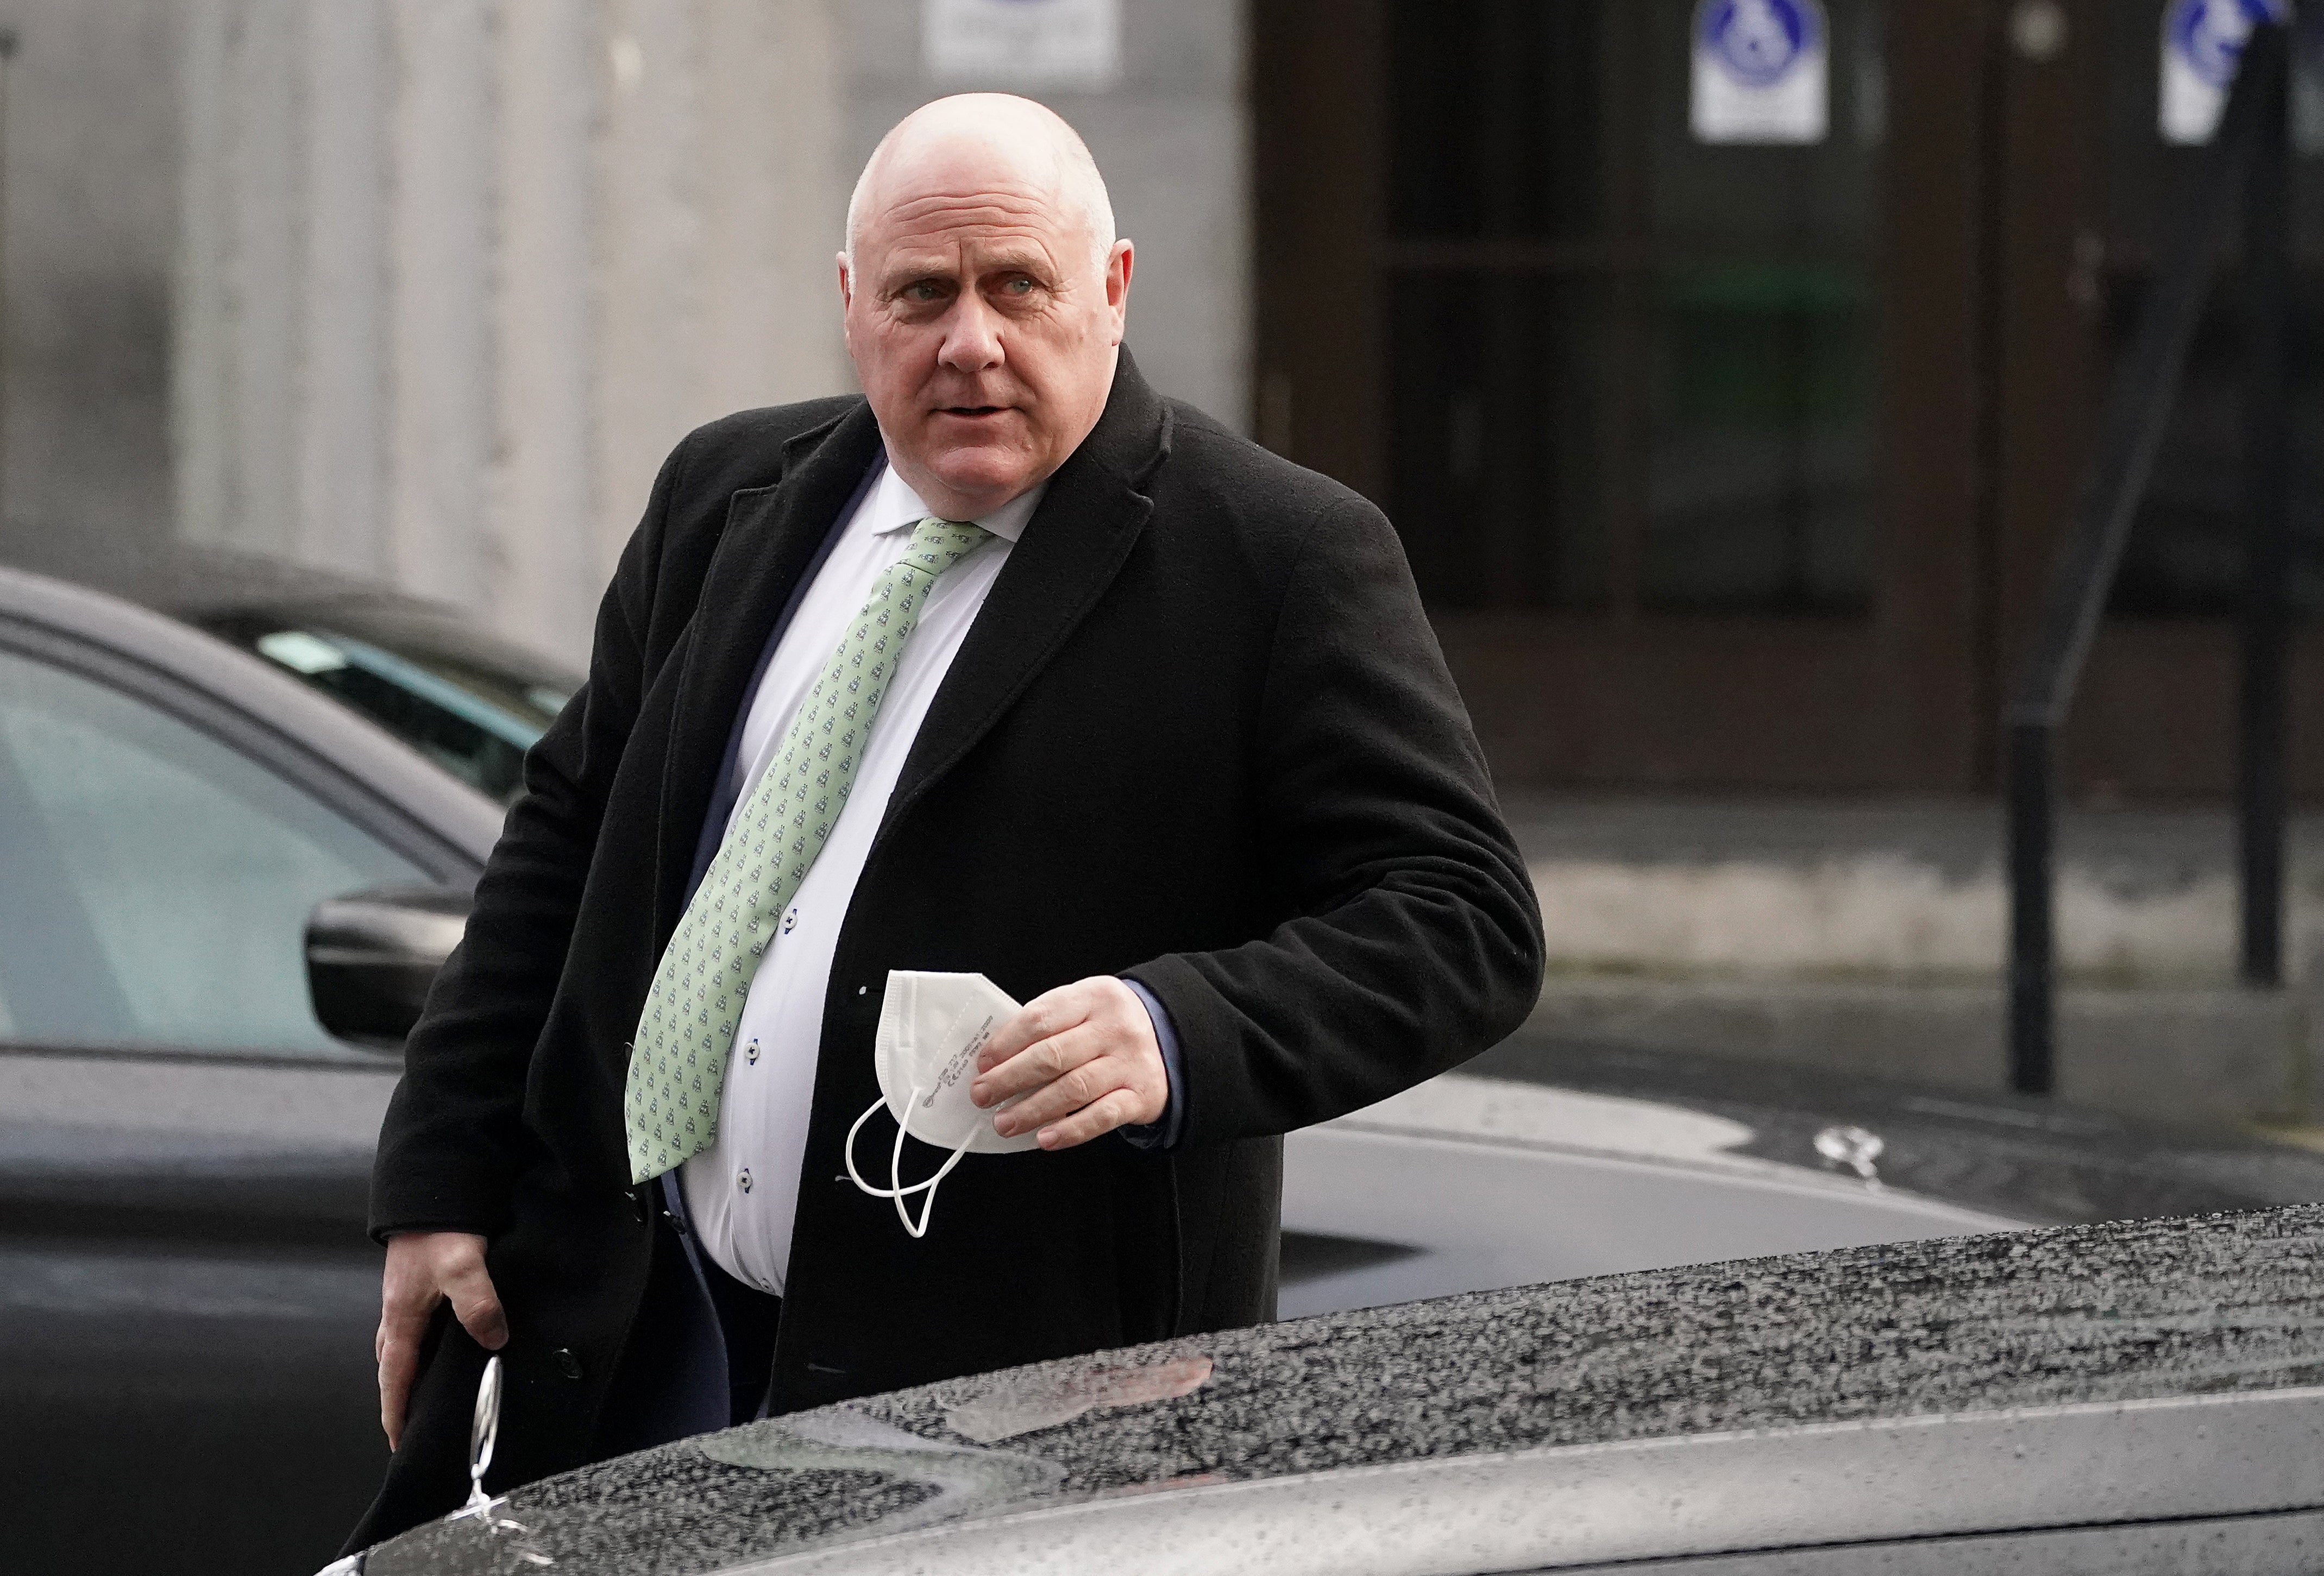 Independent TD Noel Grealish arriving at Galway court to attend a hearing where was one of four people accused of breaching Covid restrictions by organising an Oireachtas Golf Society event. All charges were dismissed (PA)